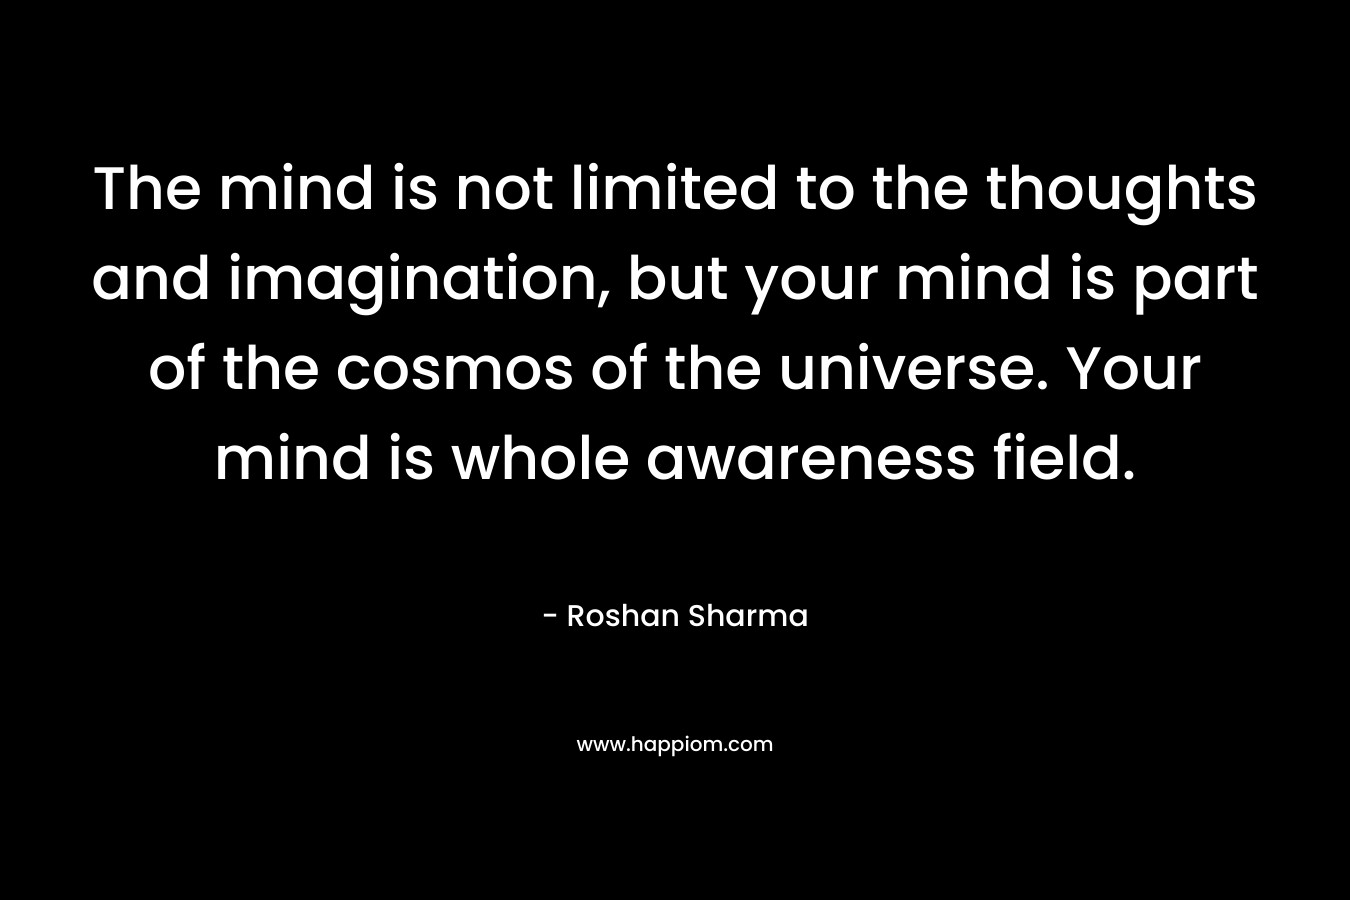 The mind is not limited to the thoughts and imagination, but your mind is part of the cosmos of the universe. Your mind is whole awareness field. – Roshan Sharma